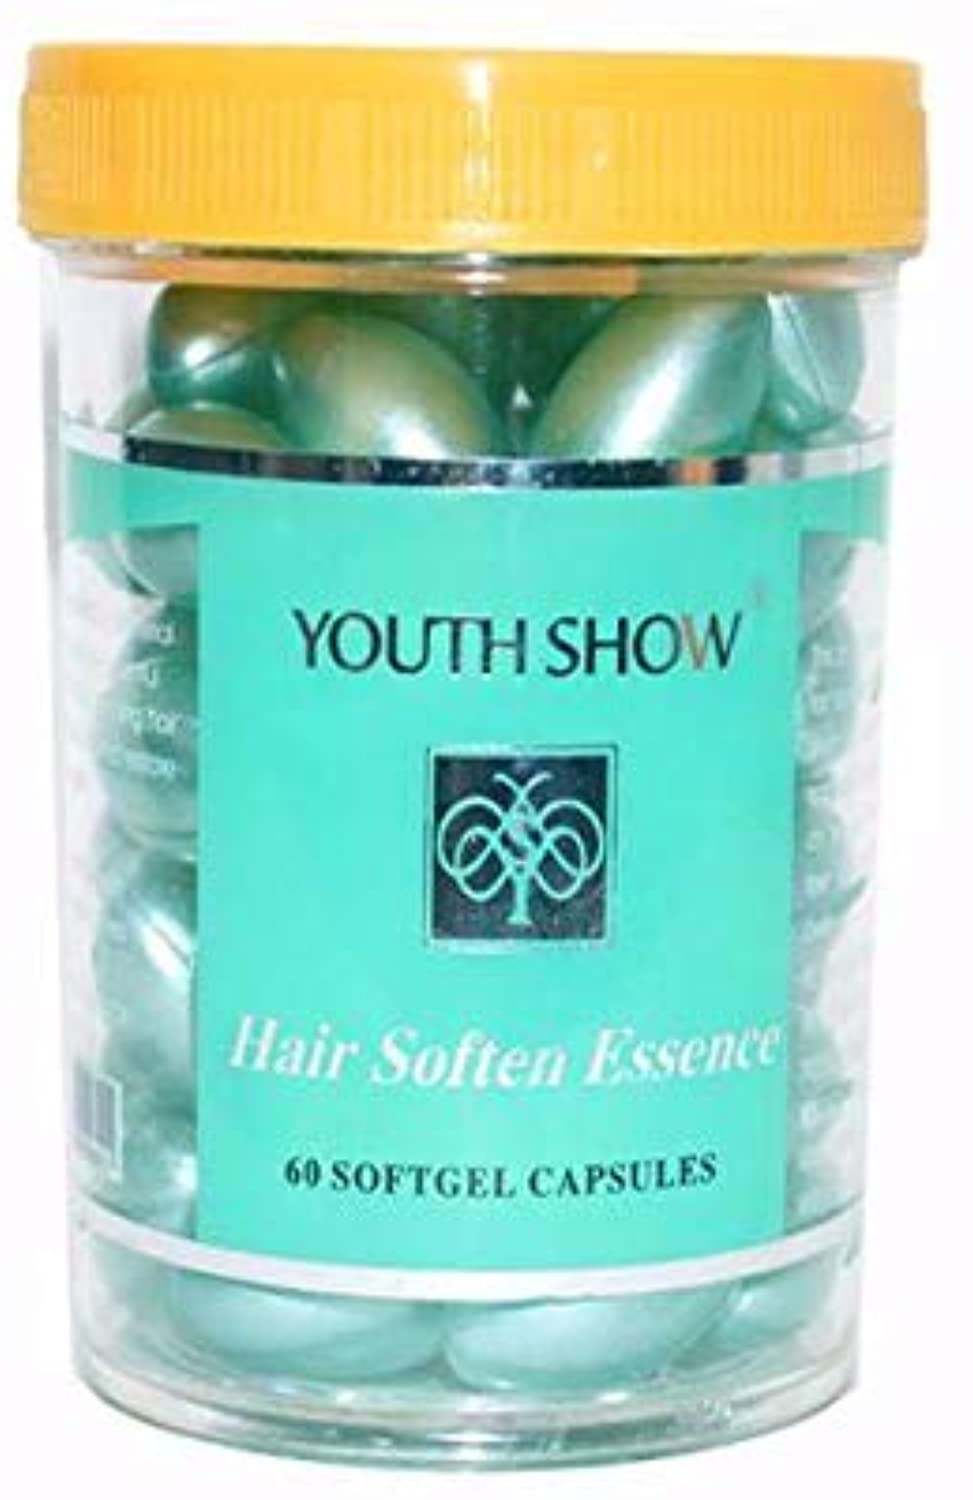 Youth Show Hair Soften Essence 60 Capsule- Green 